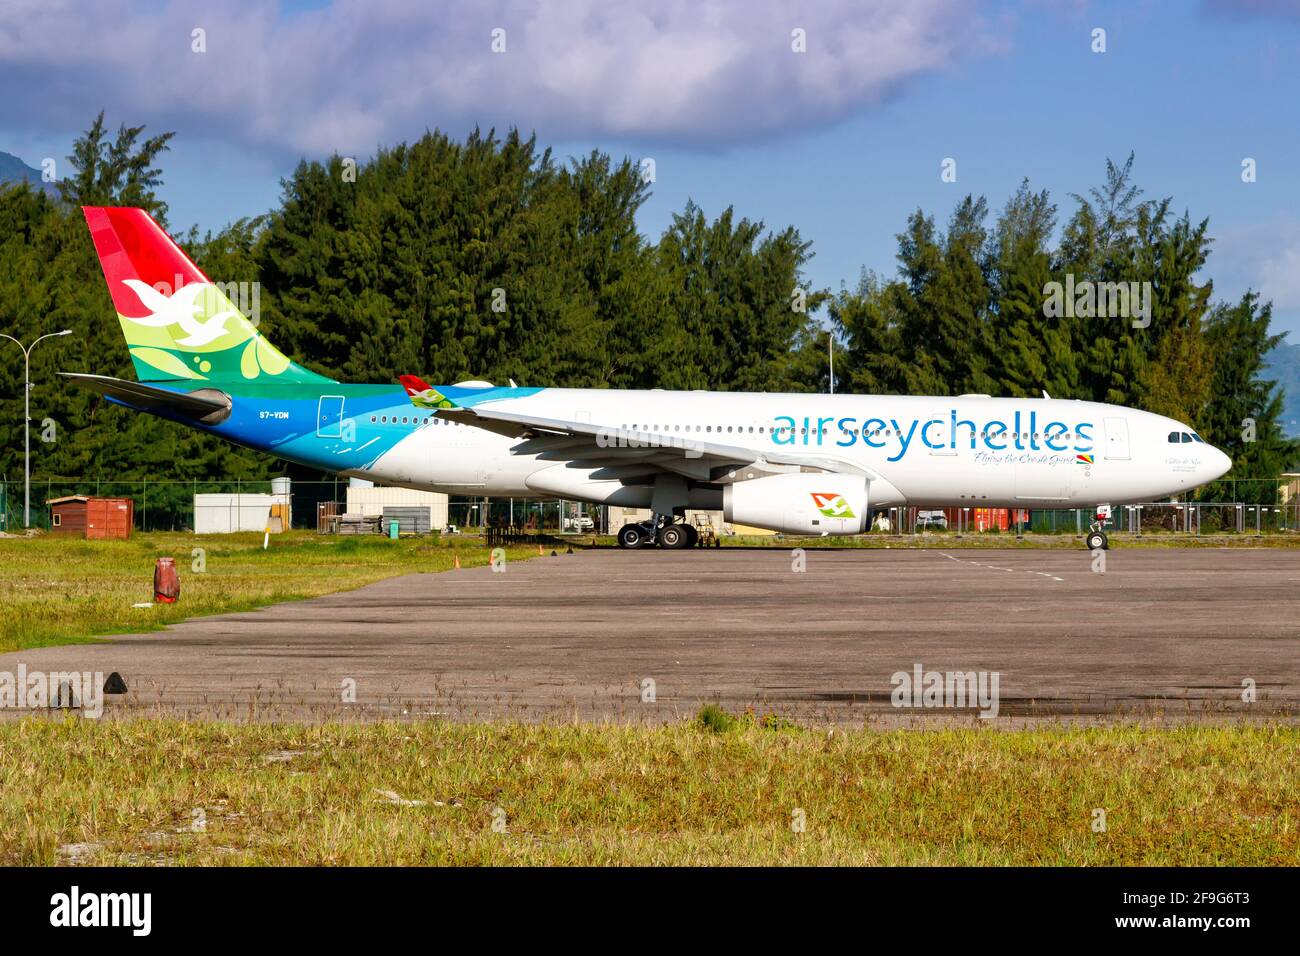 Mahe, Seychelles - November 26, 2017: Air Seychelles Airbus A330 airplane at Seychelles International Airport (SEZ) in the Seychelles. Airbus is a Eur Stock Photo